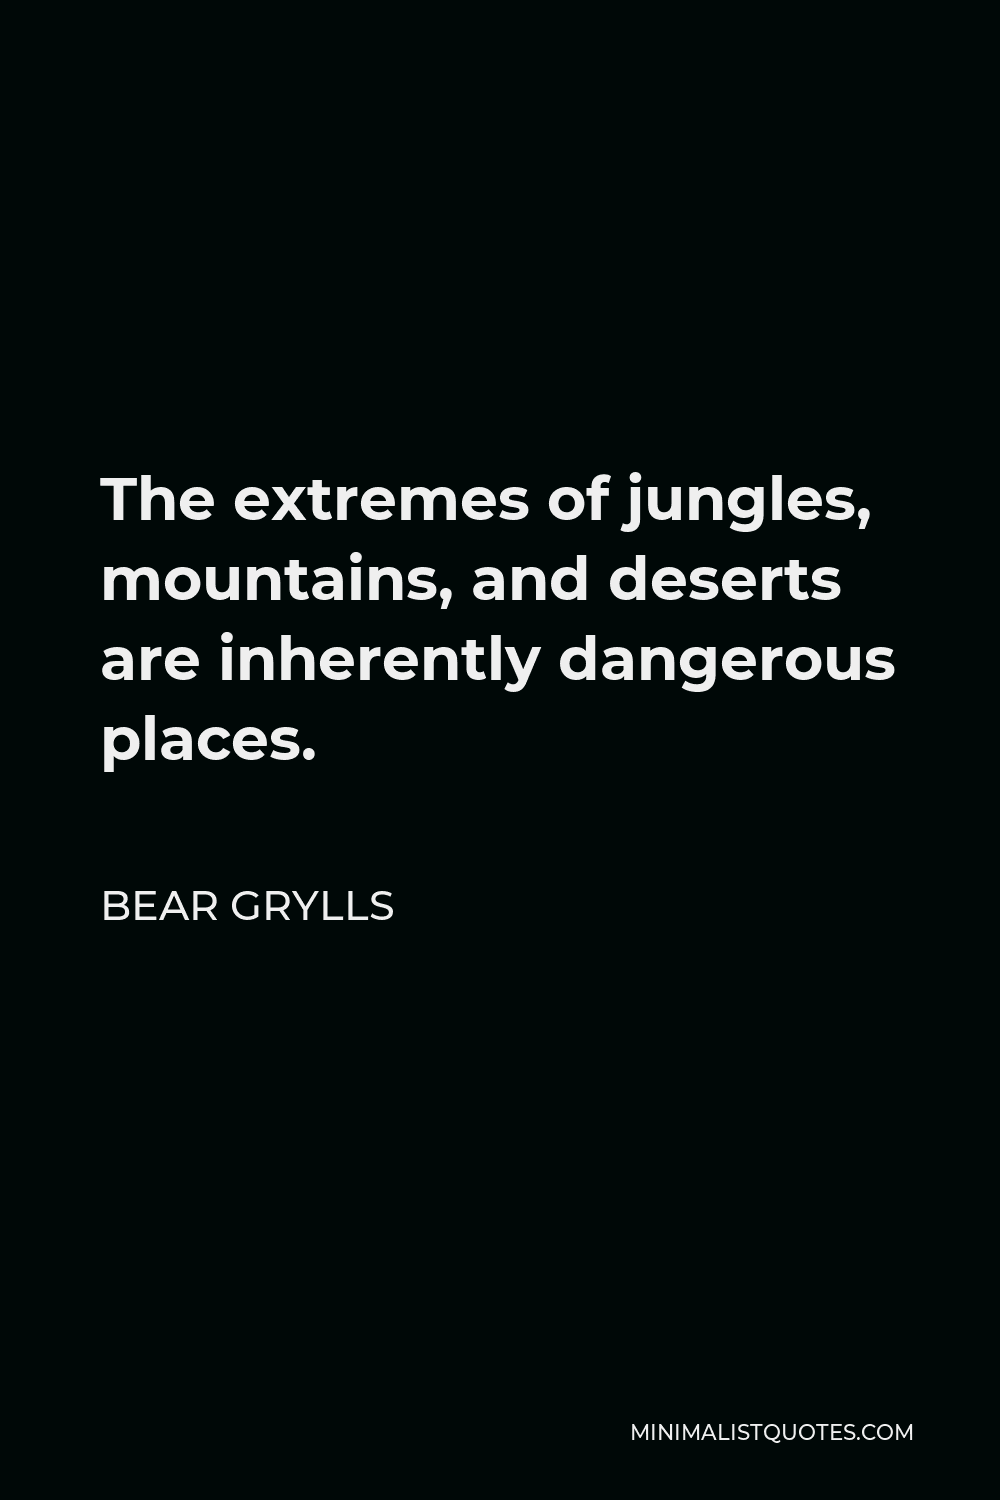 Bear Grylls Quote - The extremes of jungles, mountains, and deserts are inherently dangerous places.